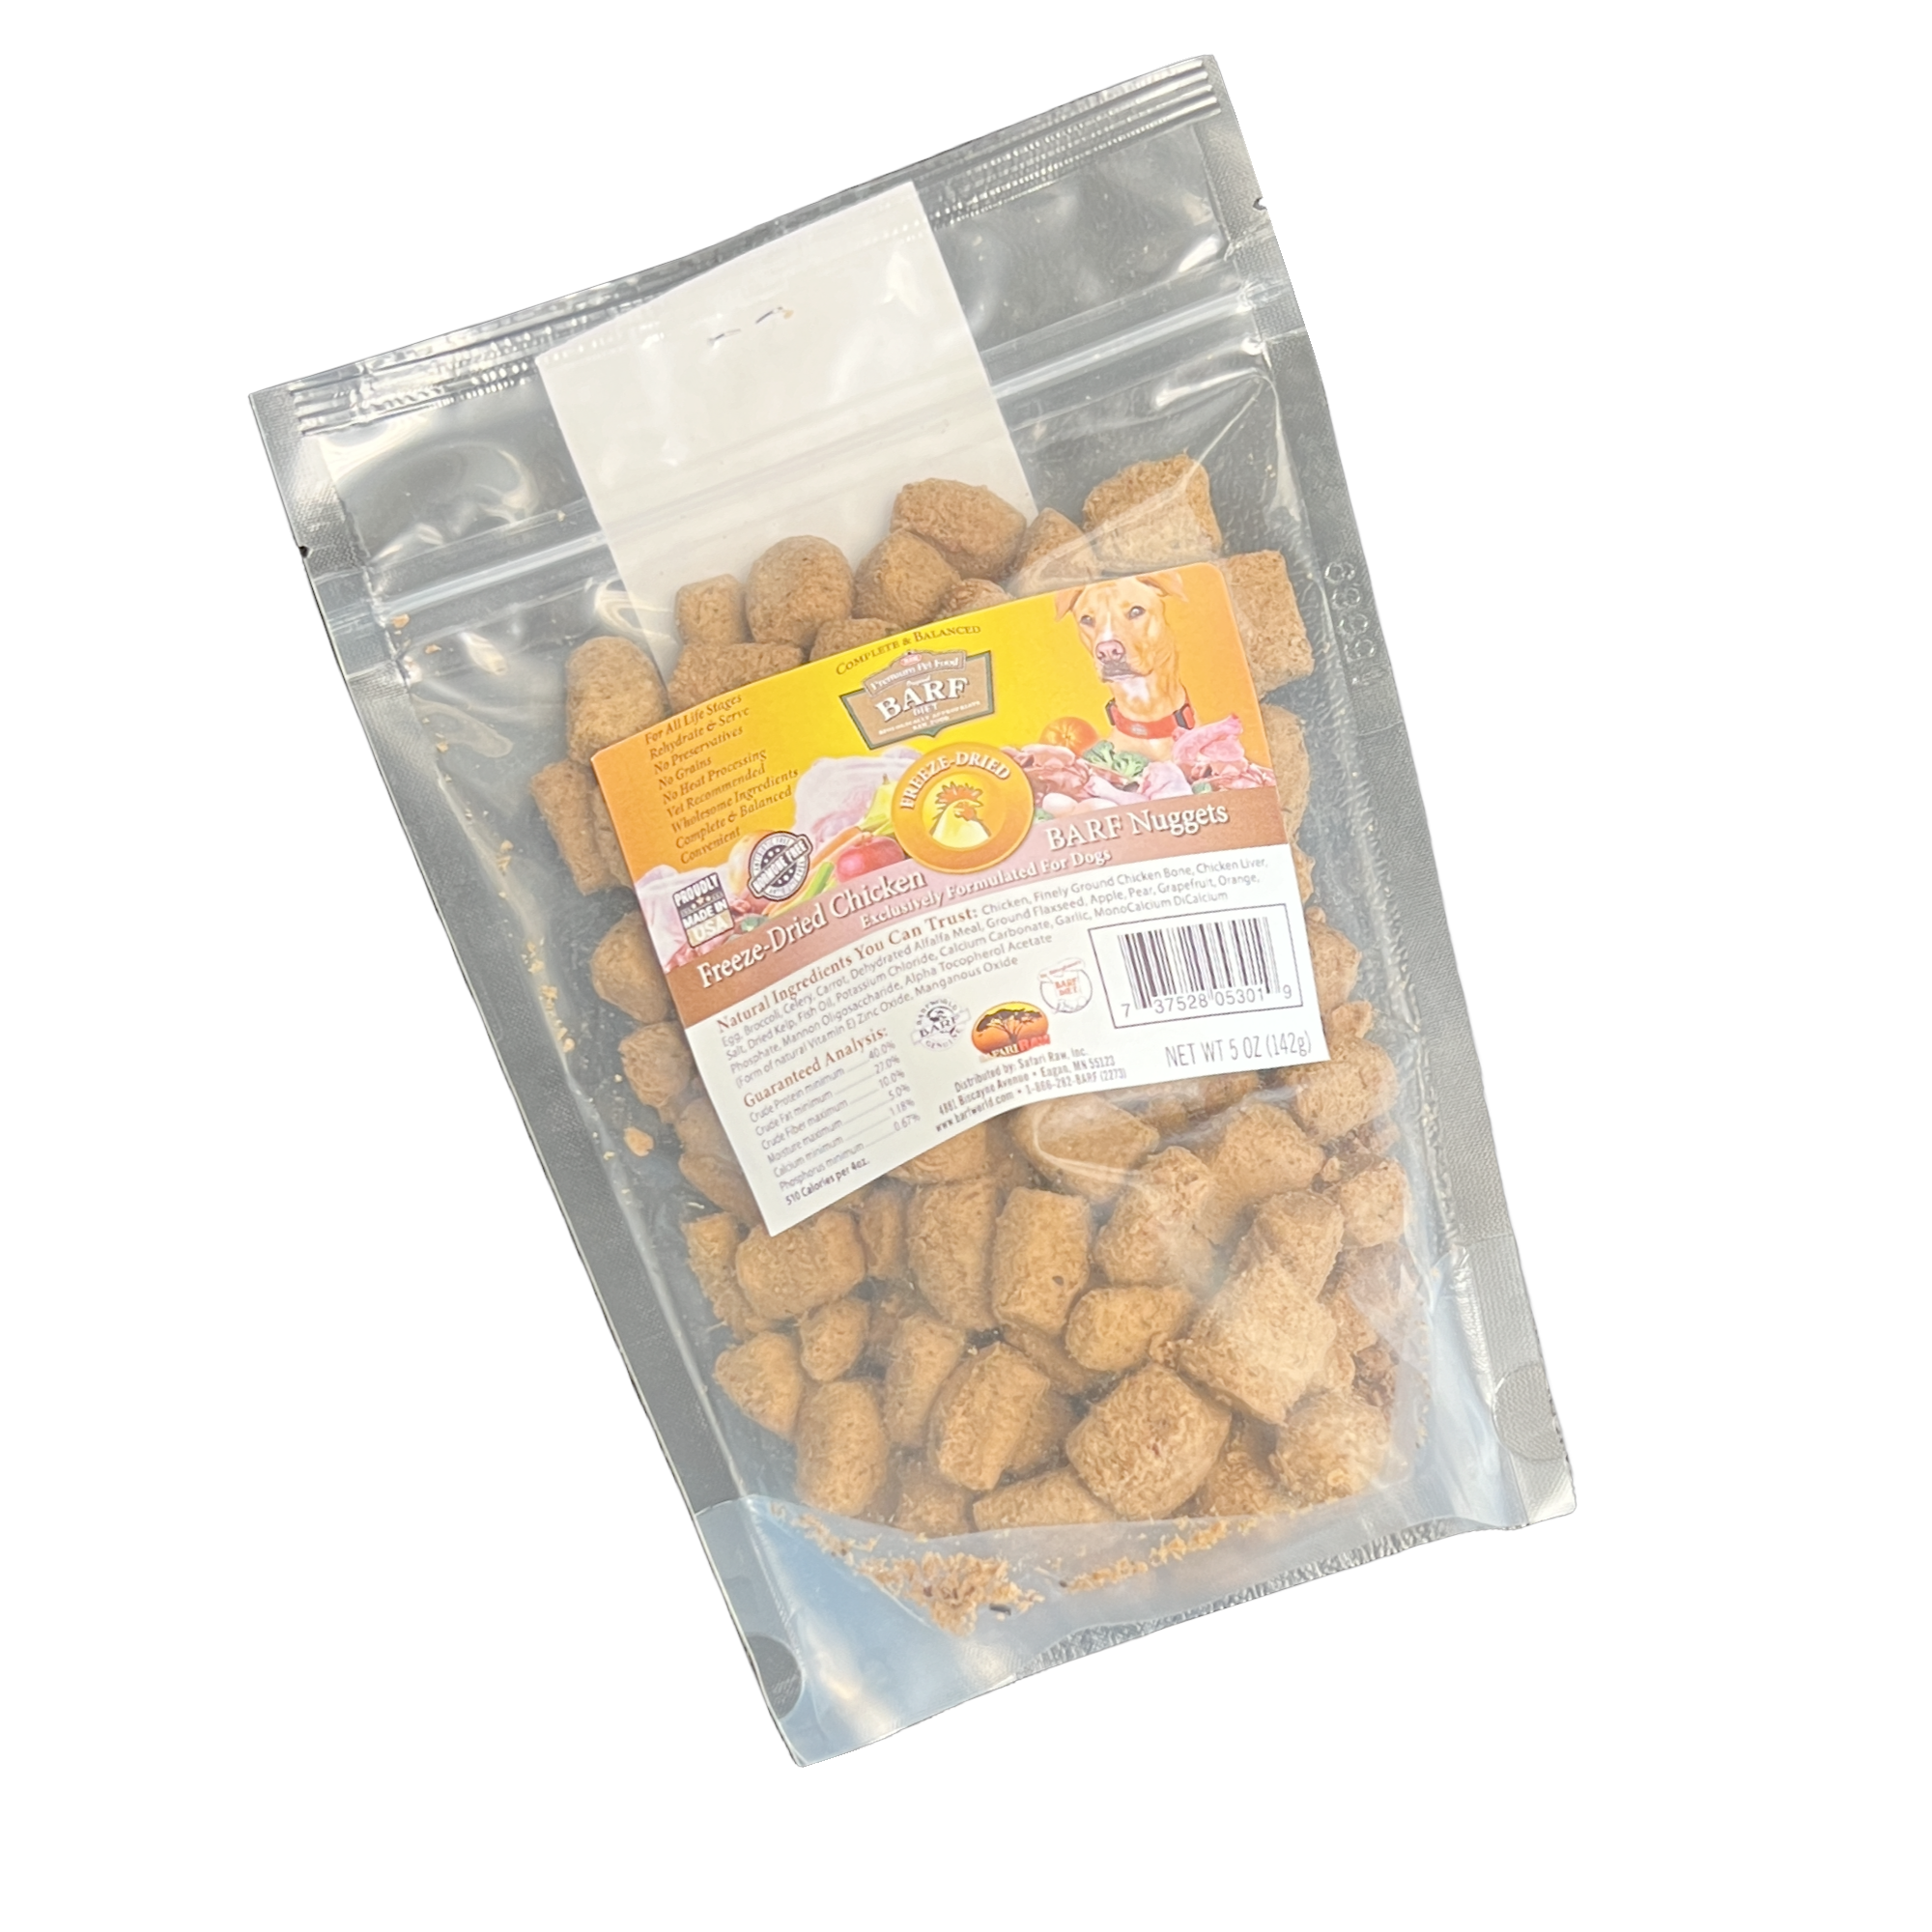 Freeze dried chicken dog treats from BARF World